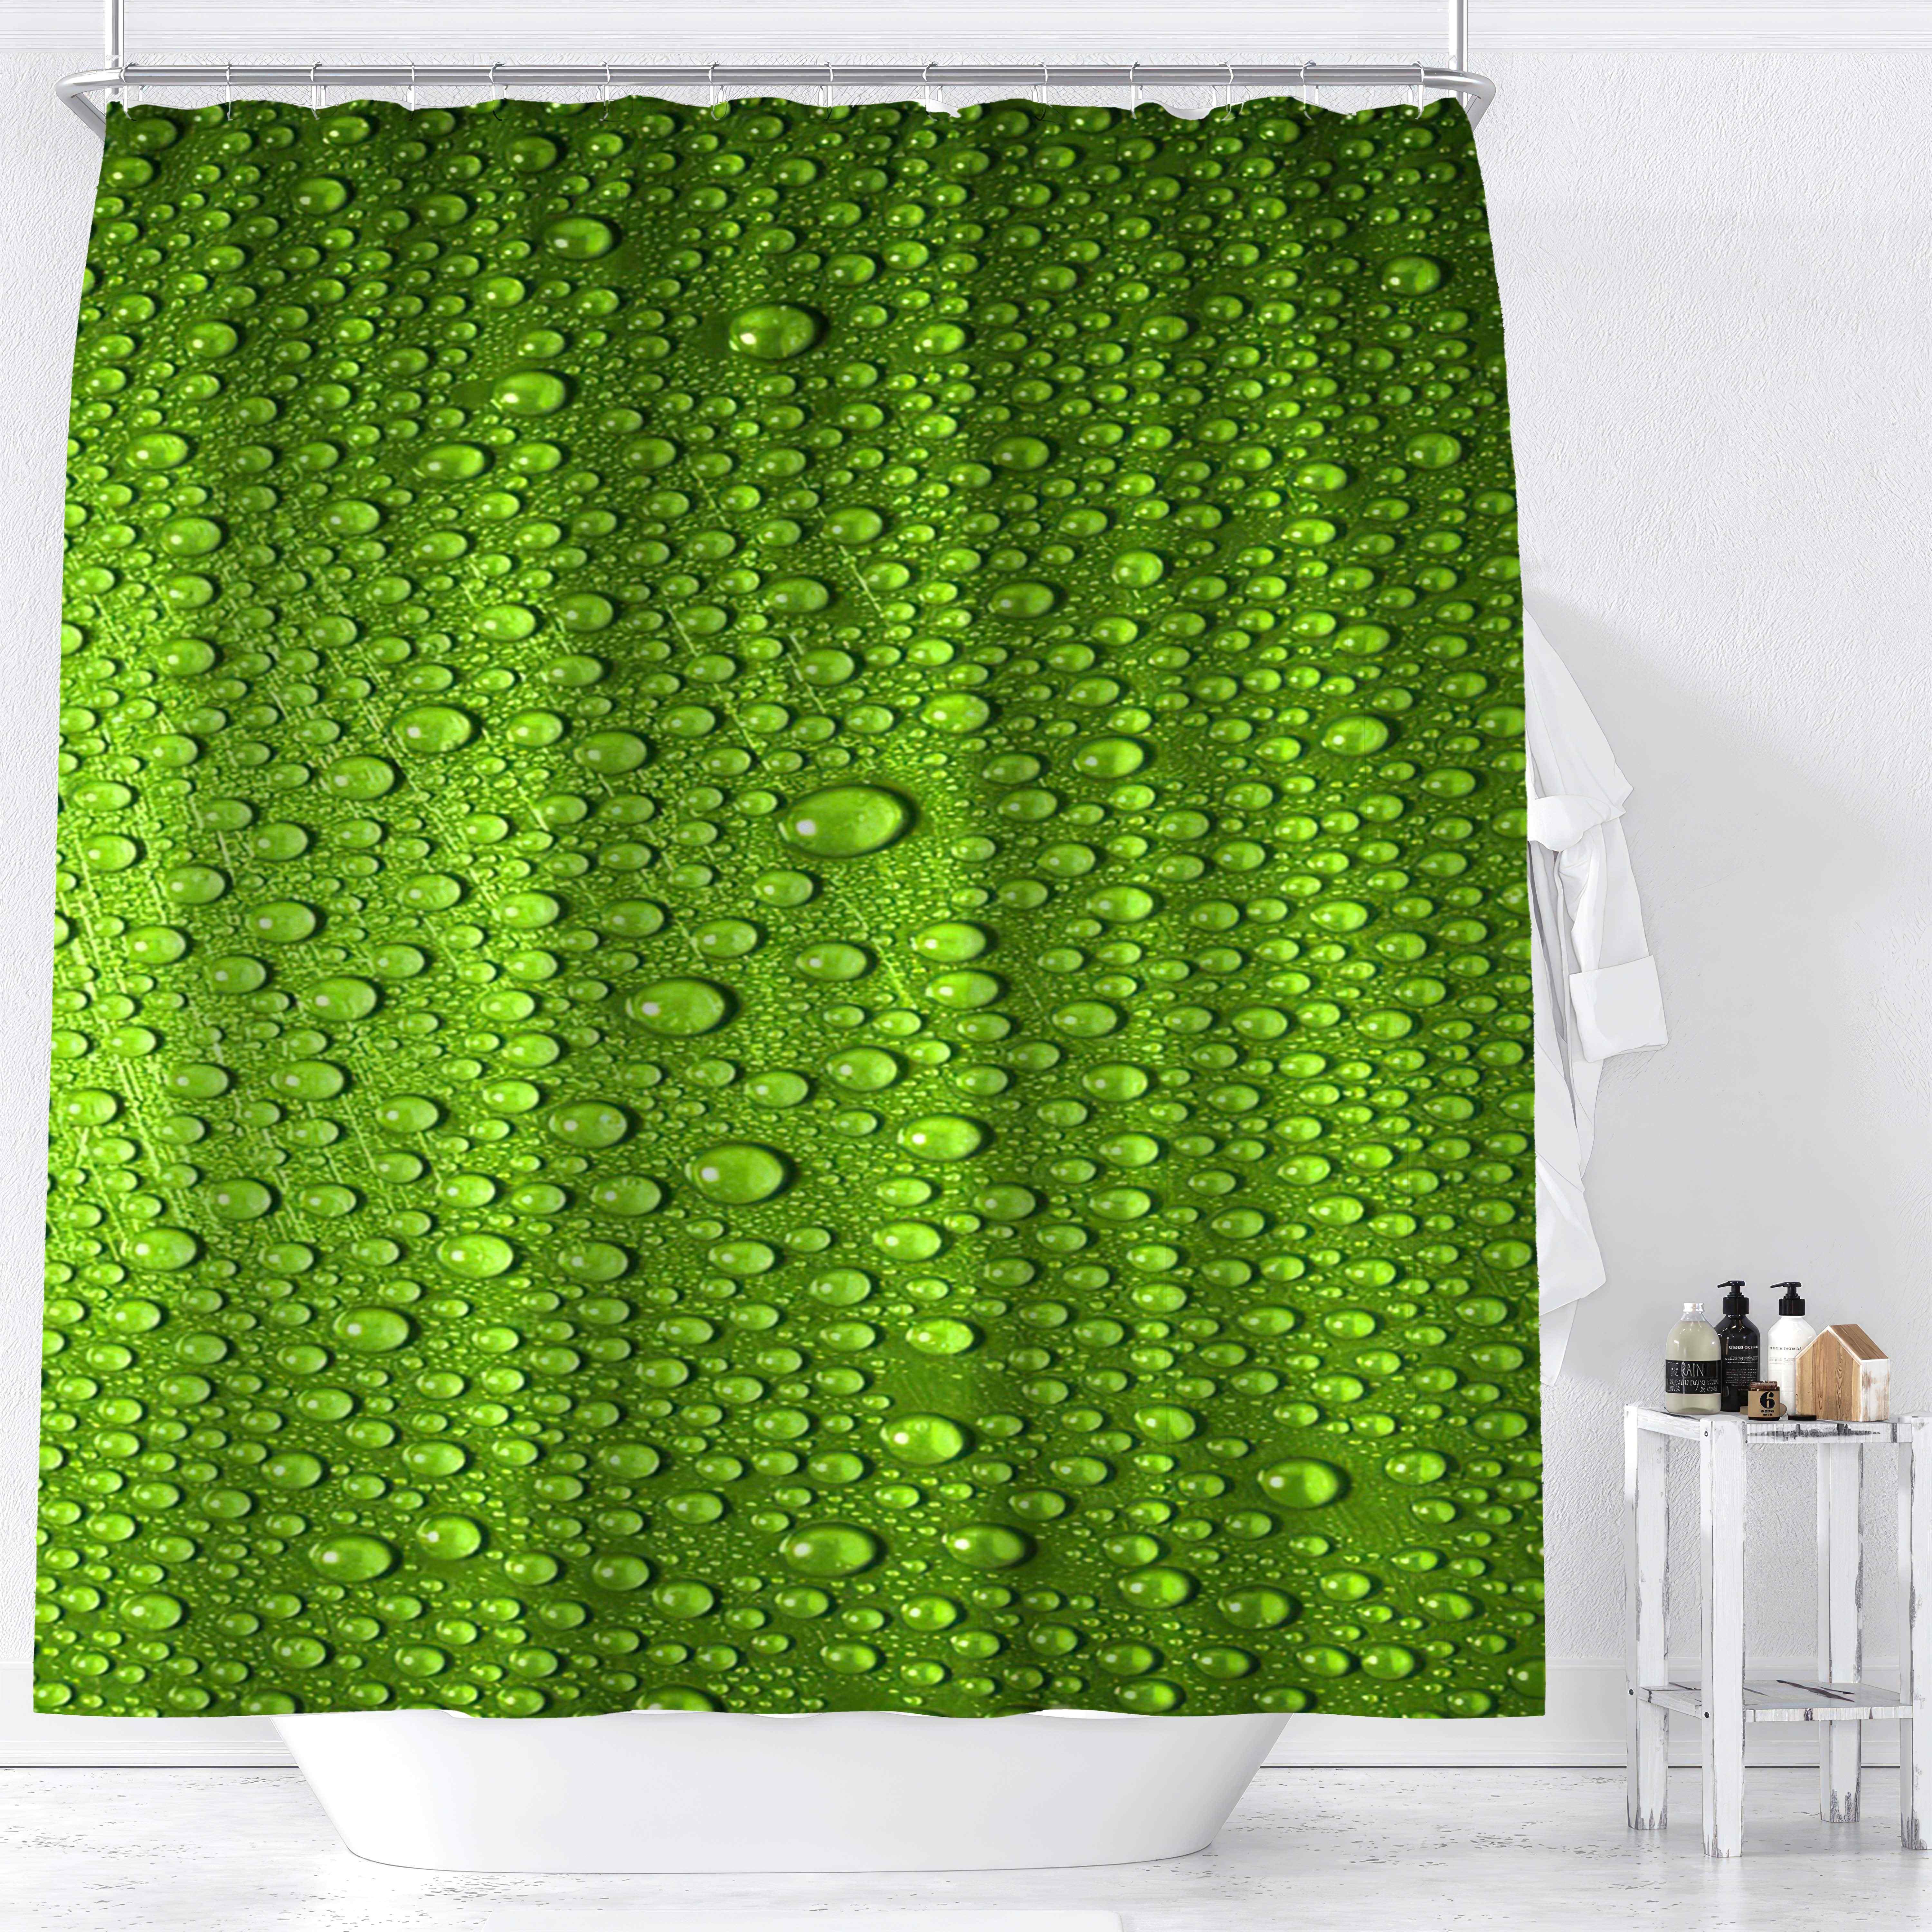 

Waterproof Green Water Droplet Pattern Shower Curtain With Hooks - Machine Washable, All-season Polyester Bathroom Decor By Ywjhui Shower Curtain Sets For Bathrooms Shower Curtain For Bathrooms